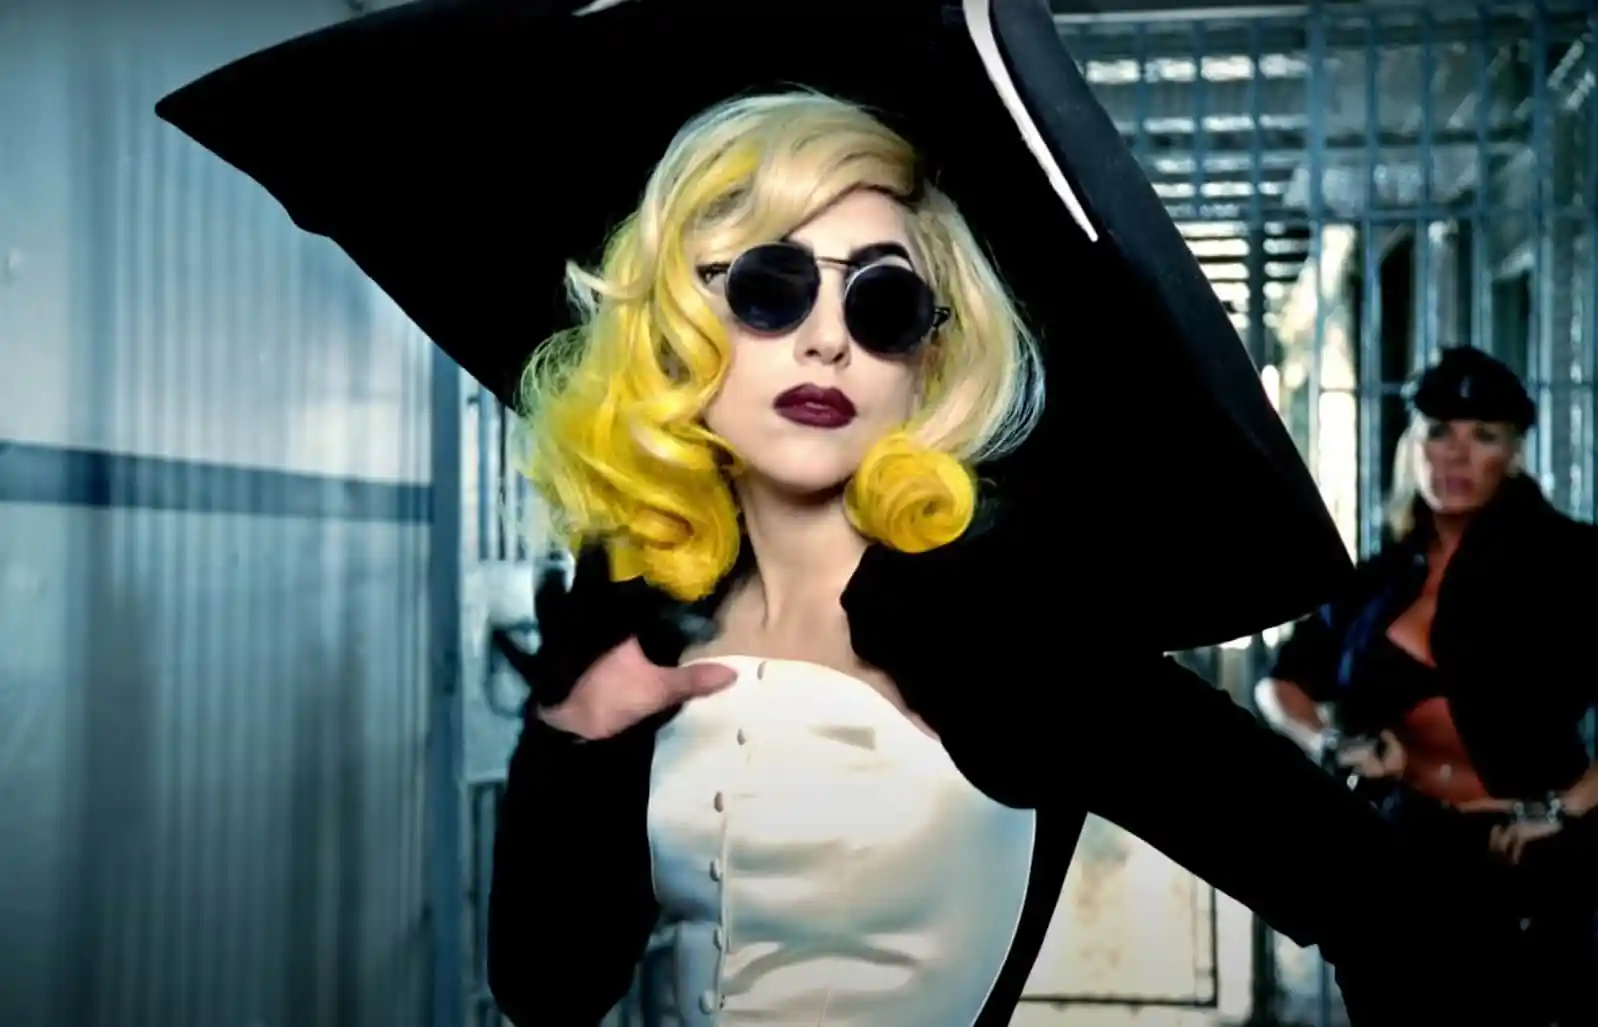 Lady Gaga wearing Mugler in the music video for Telephone.